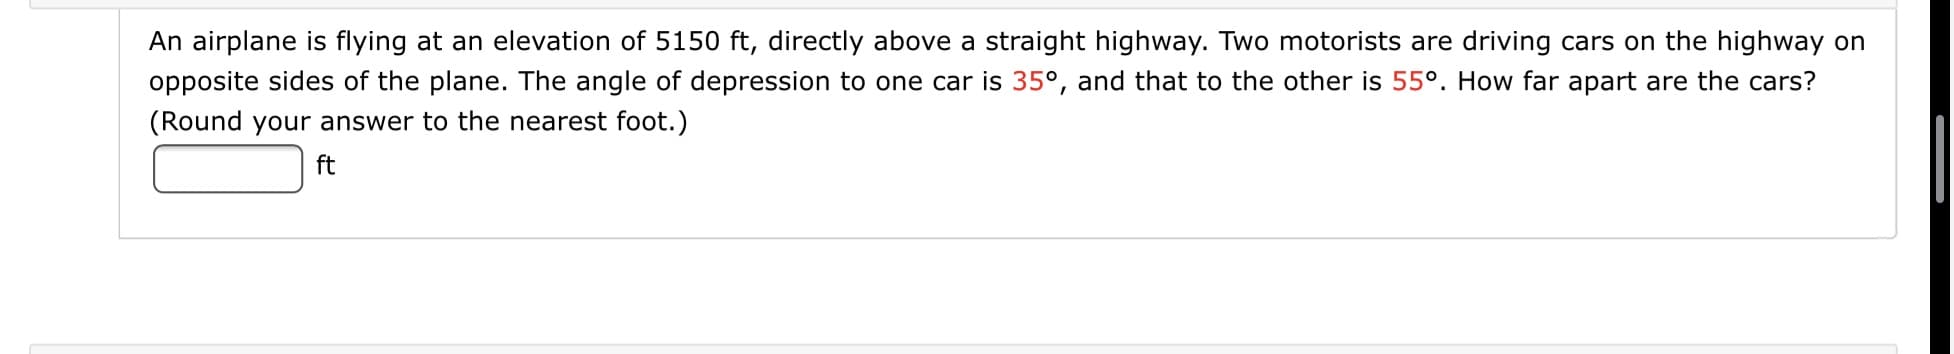 An airplane is flying at an elevation of 5150 ft, directly above a straight highway. Two motorists are driving cars on the highway on
opposite sides of the plane. The angle of depression to one car is 35°, and that to the other is 55º. How far apart are the cars?
